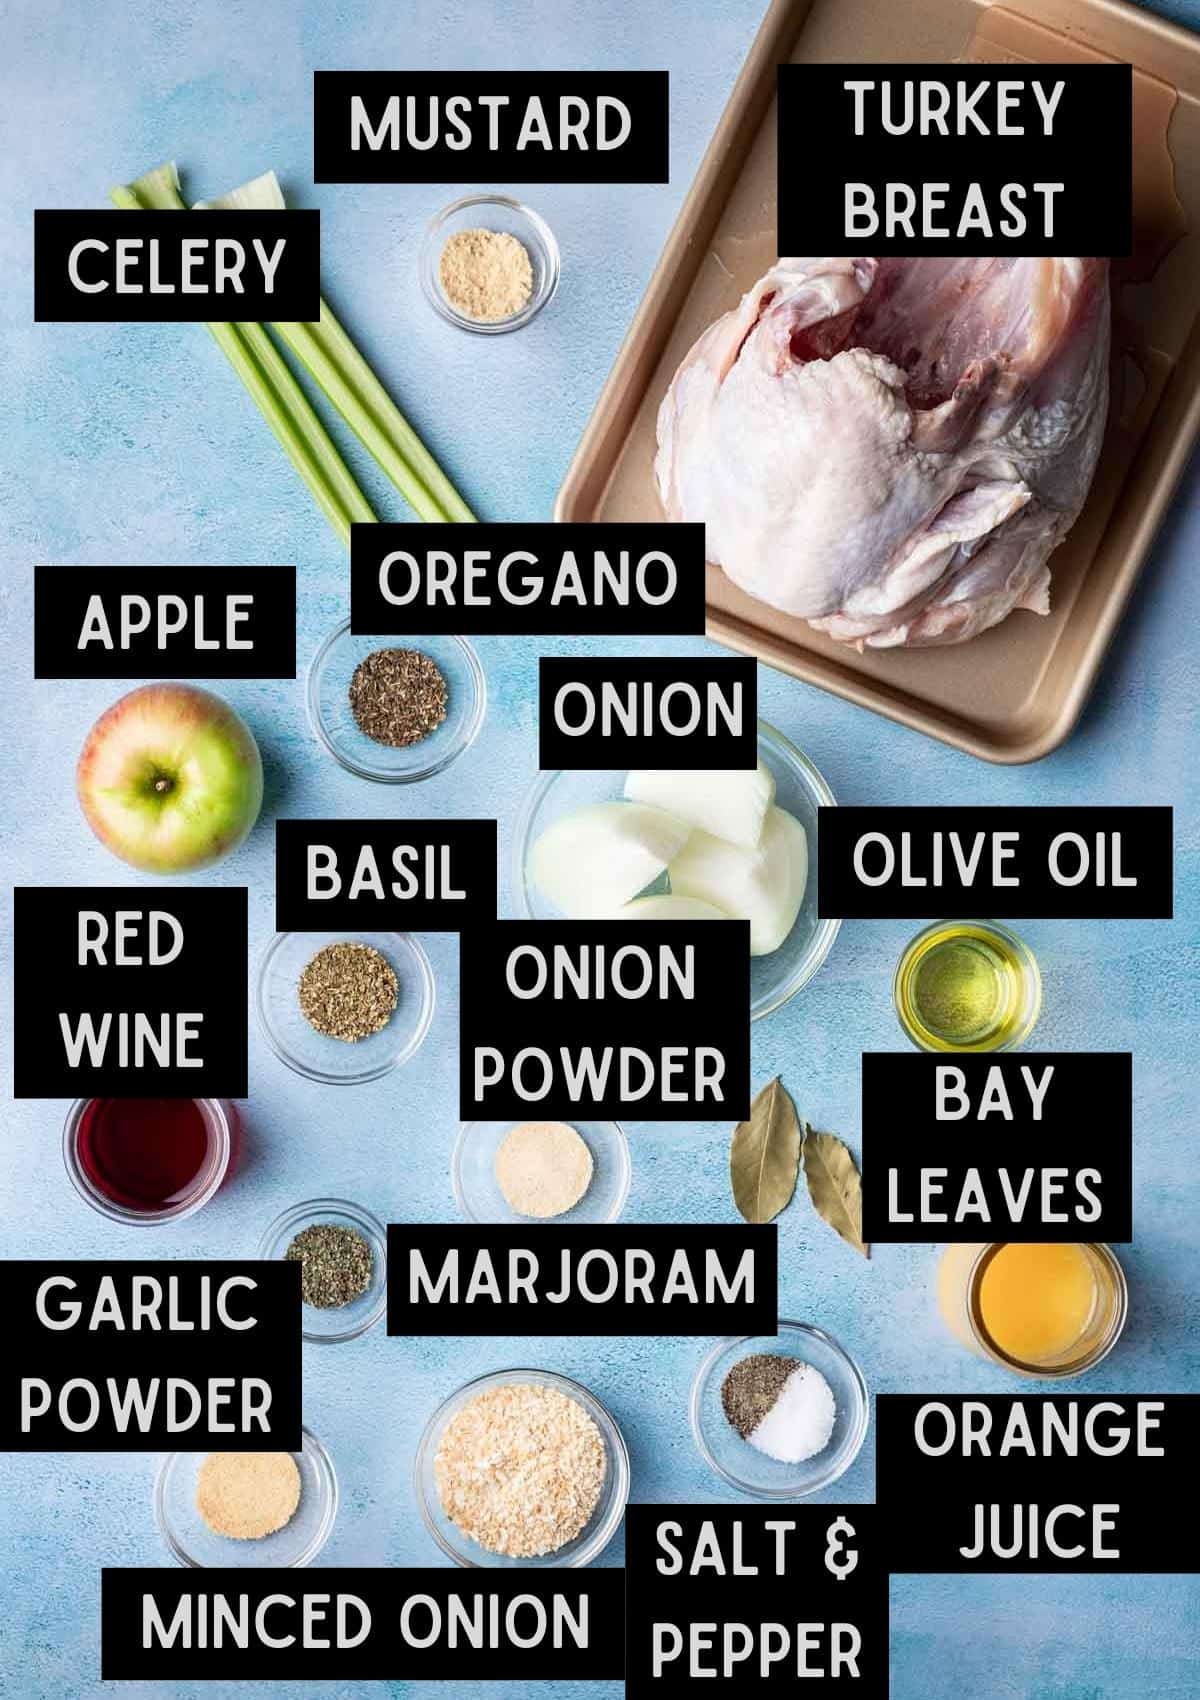 Labelled ingredients for dutch oven turkey breast (see recipe for details).